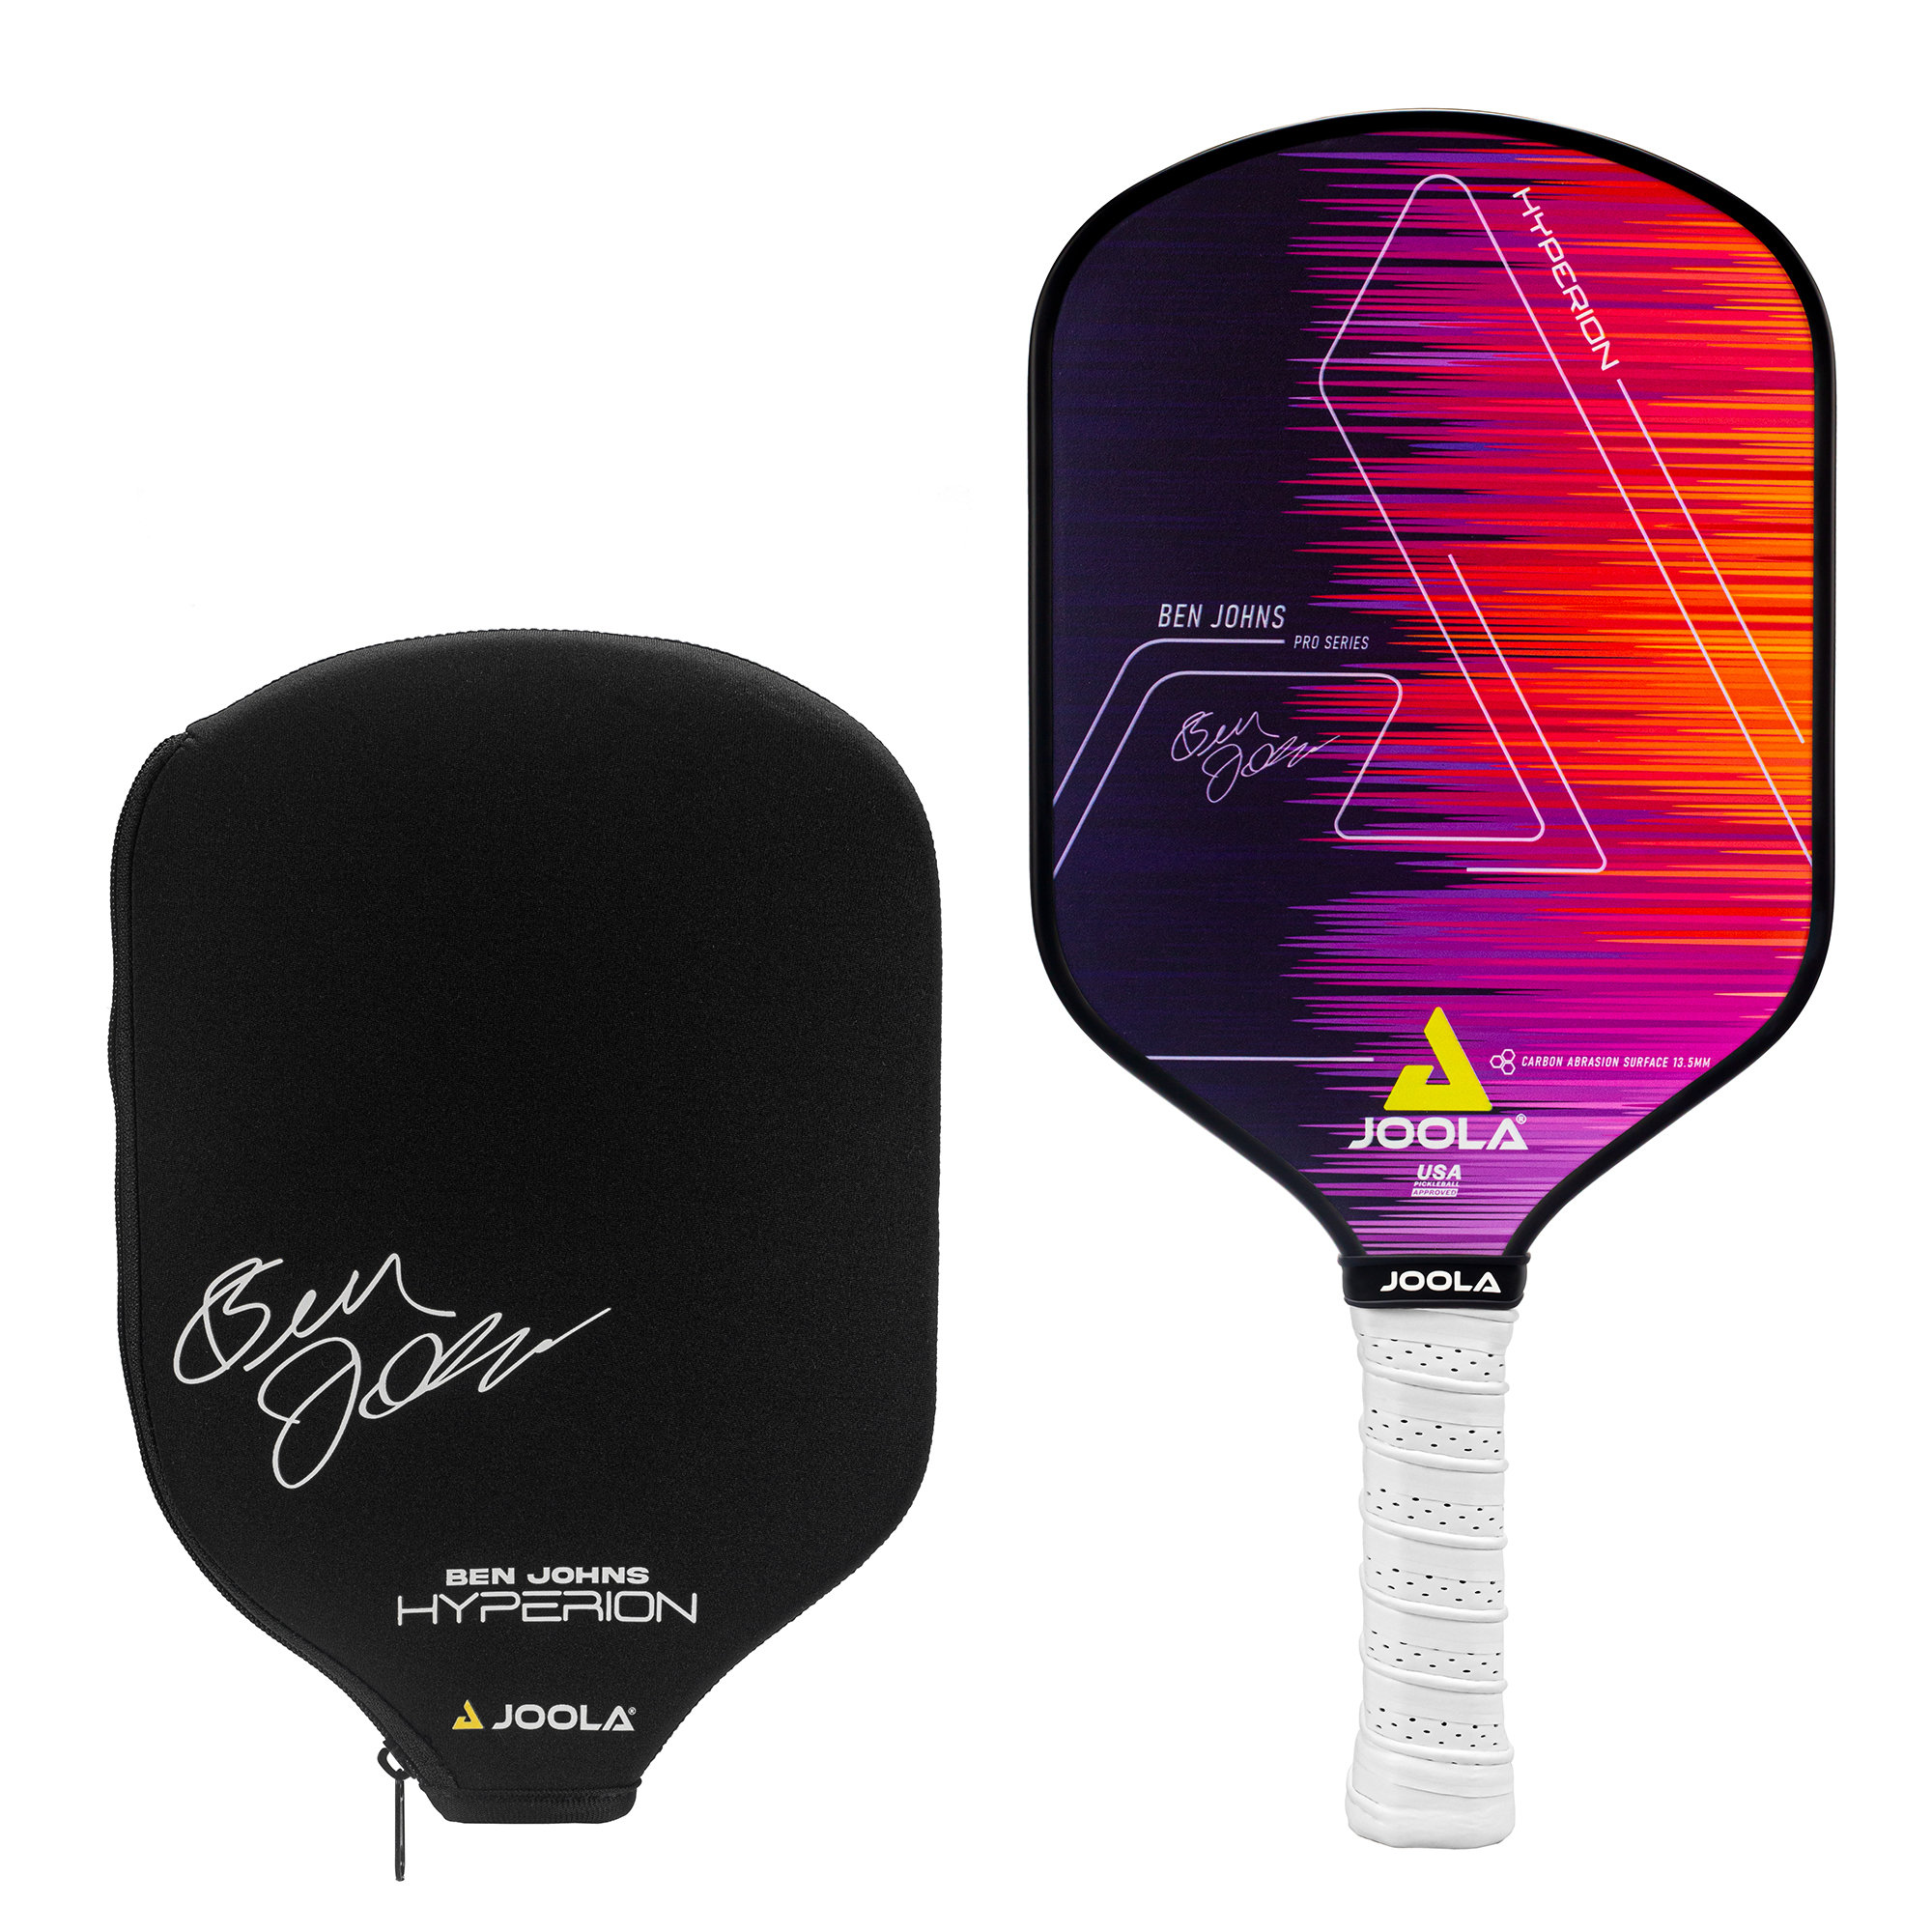 JOOLA Ben Johns Hyperion Carbon Abrasion Surface 13.5 Pickleball Paddle -  Includes Paddle Cover